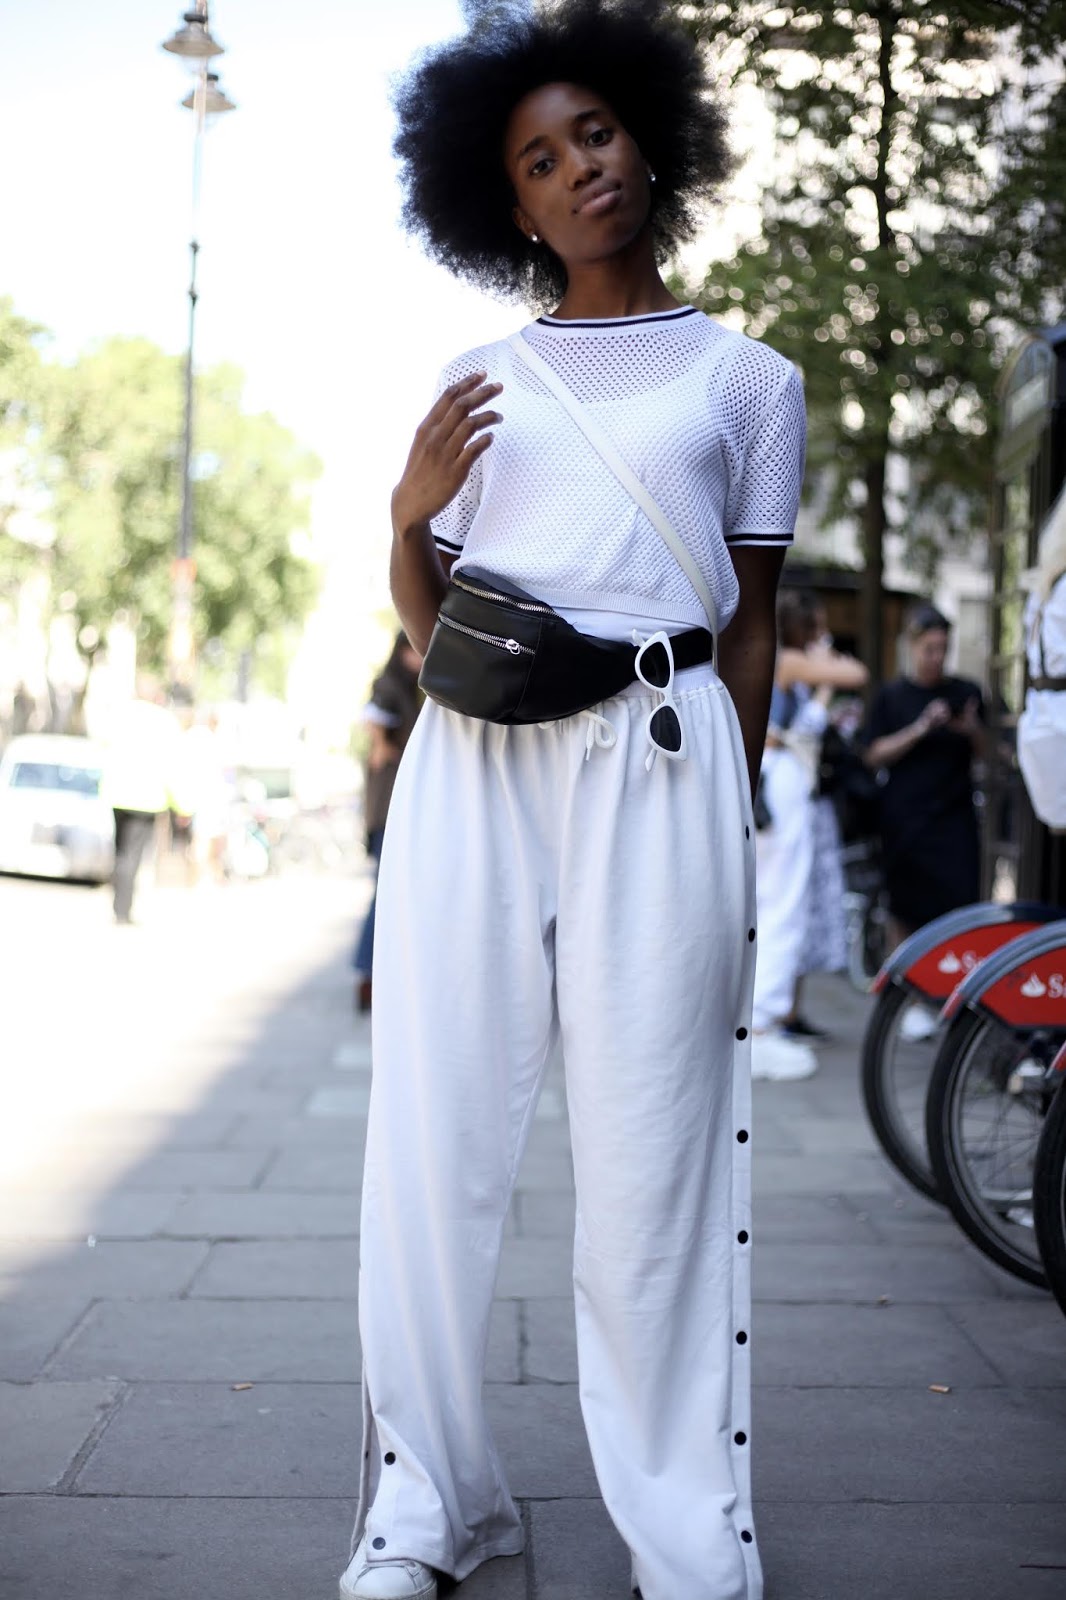 London Fashion by Paul: Street Muses...Blindness Spring/Summer 2019...LFWM